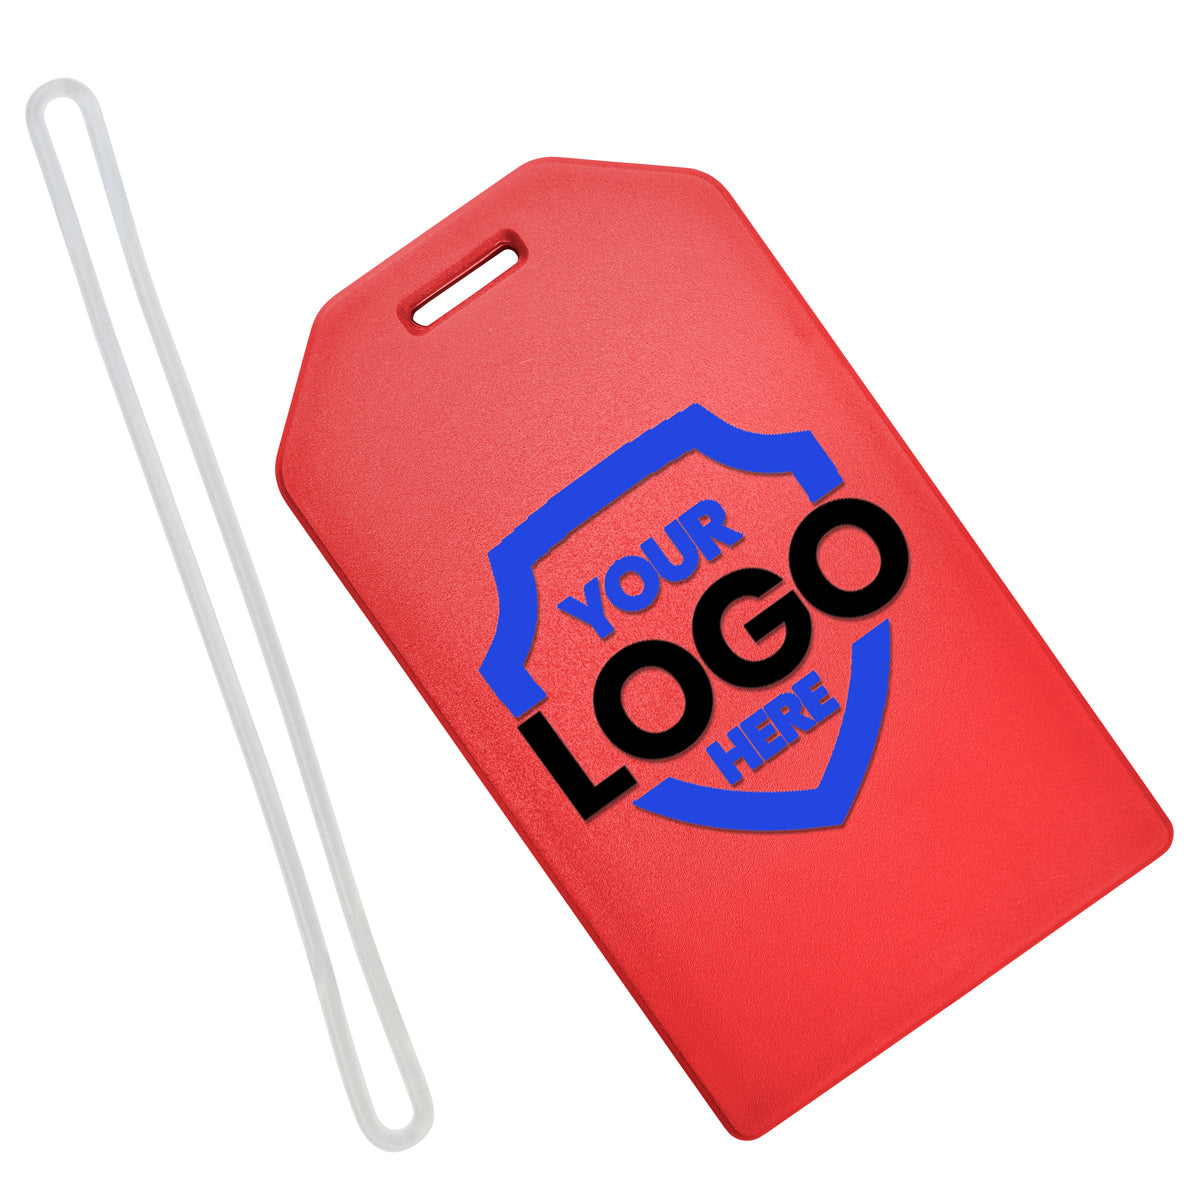 Custom Luggage Tag Holders - Personalized Rigid Plastic Bag Tags with 6" Clear Loop